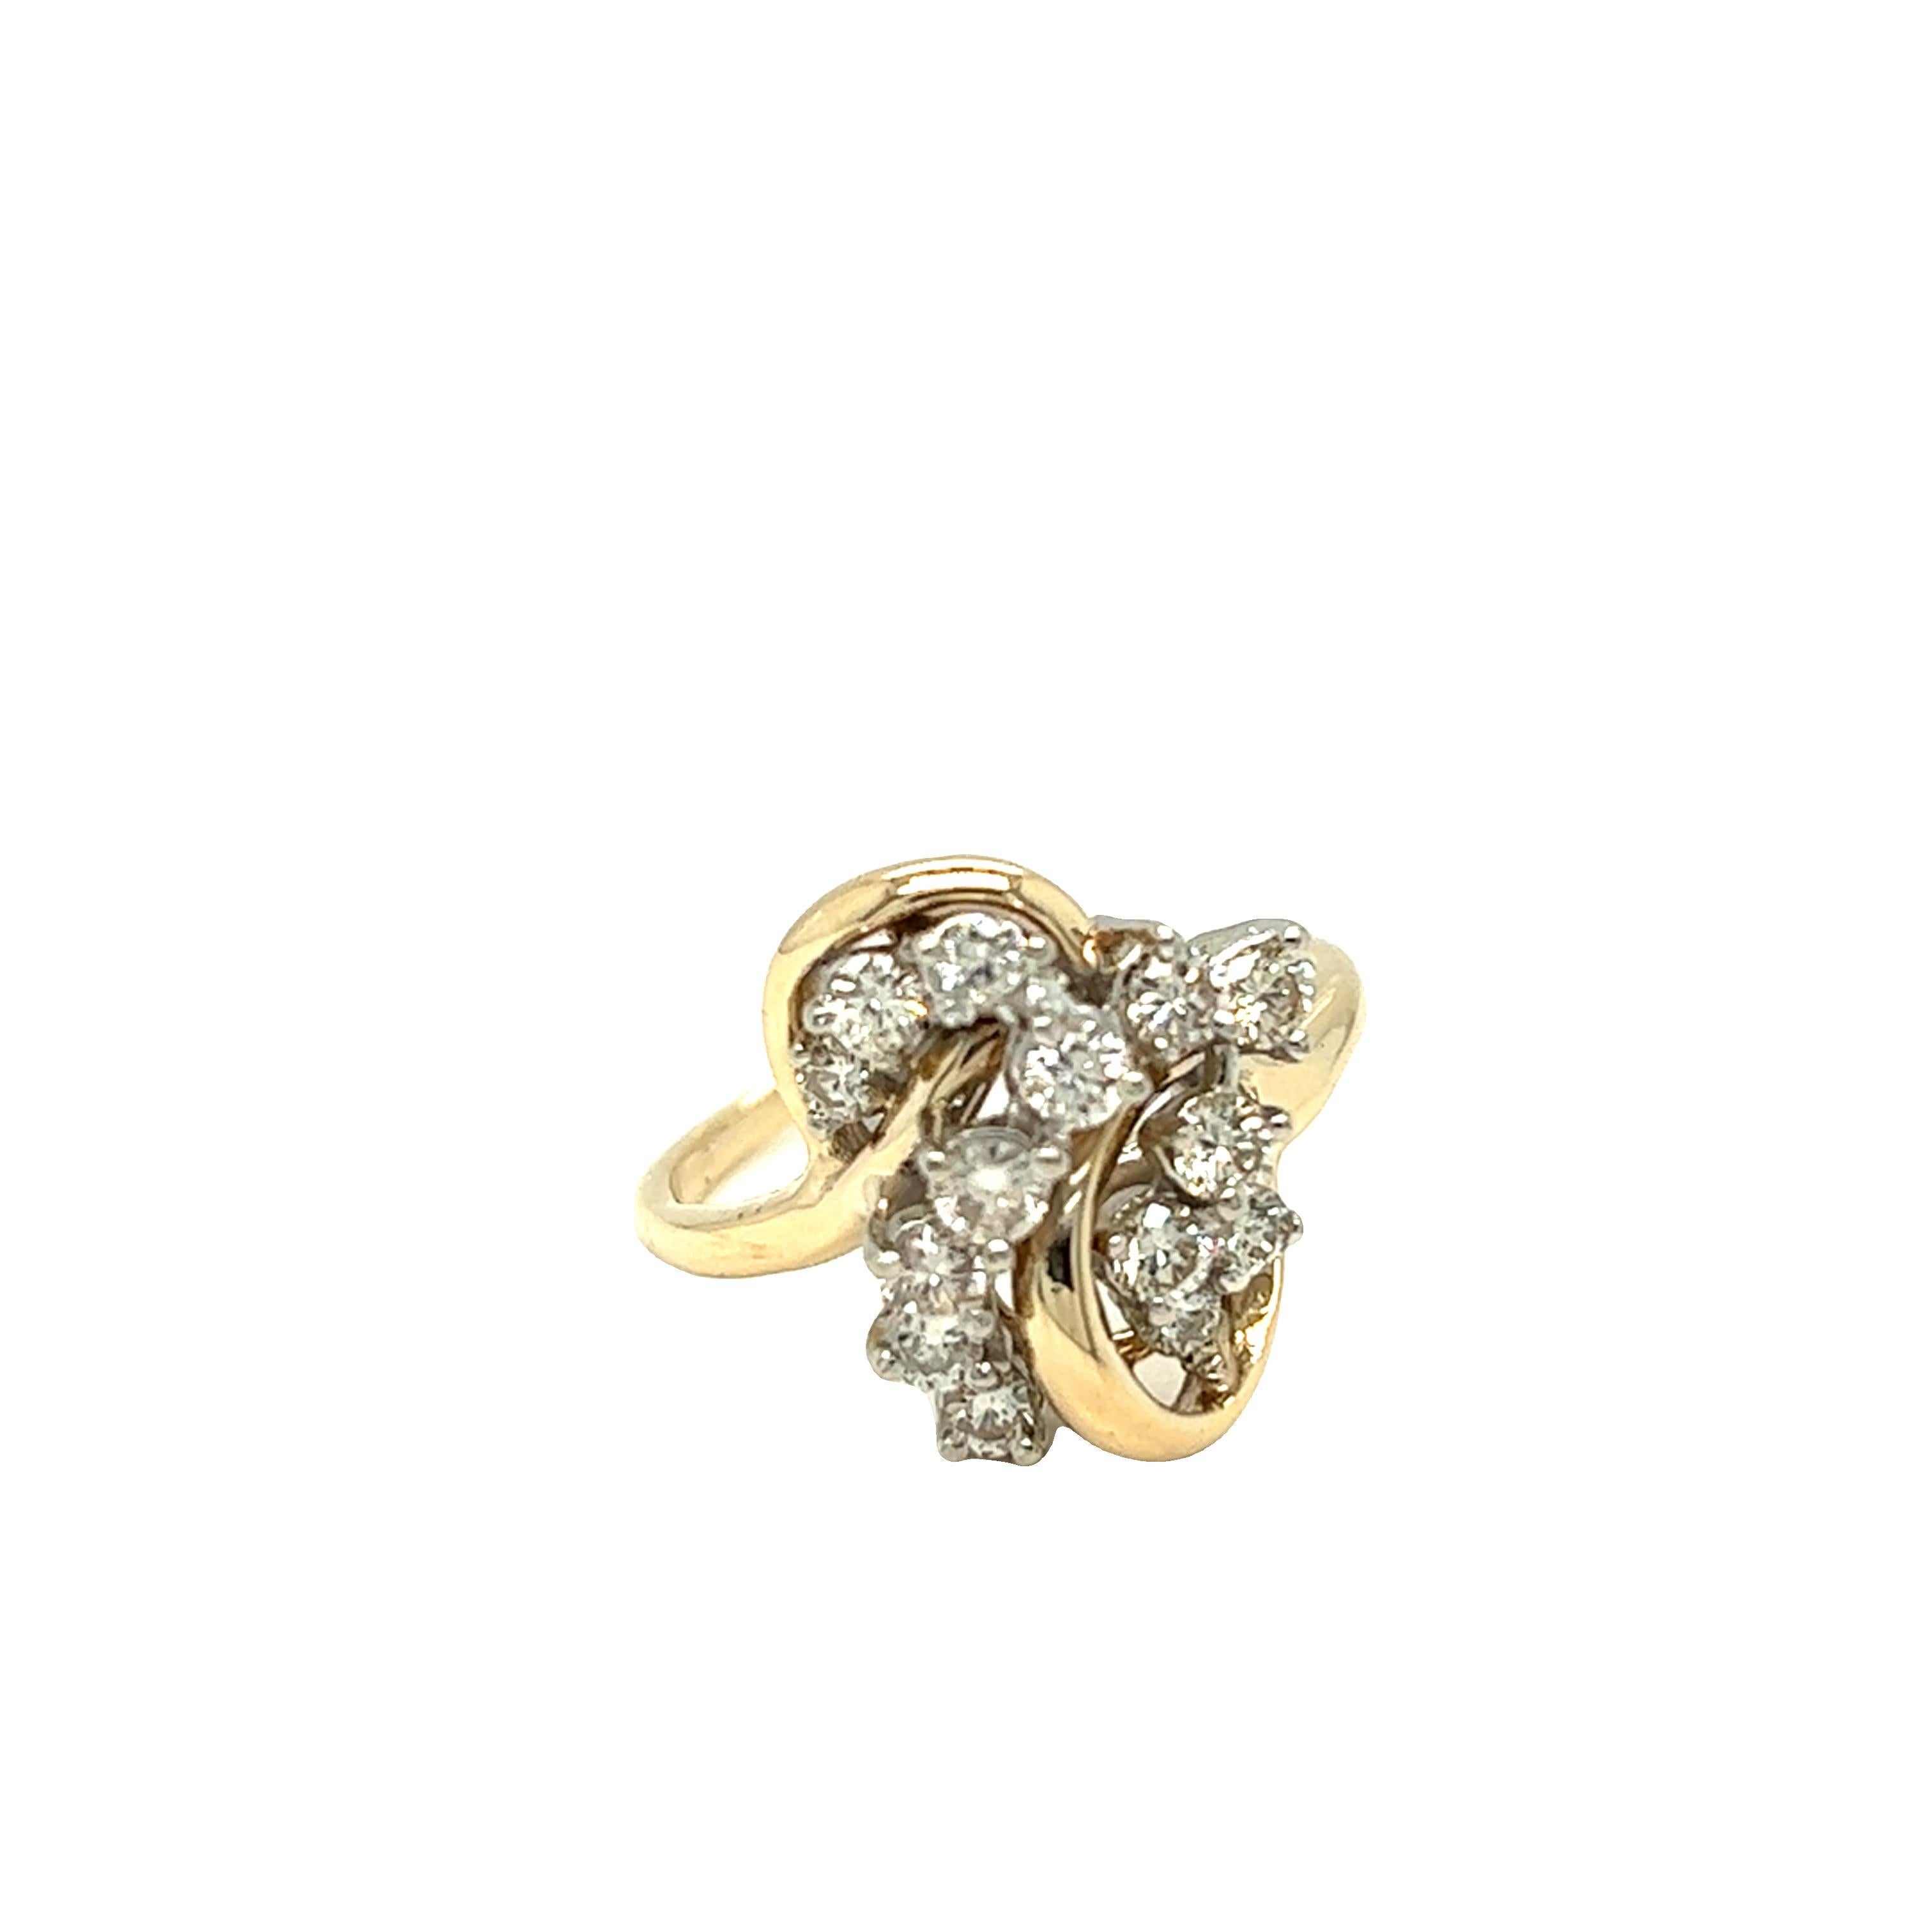 Vintage Swirl Cluster Diamond Ring 14k White and Yellow Gold For Sale 1